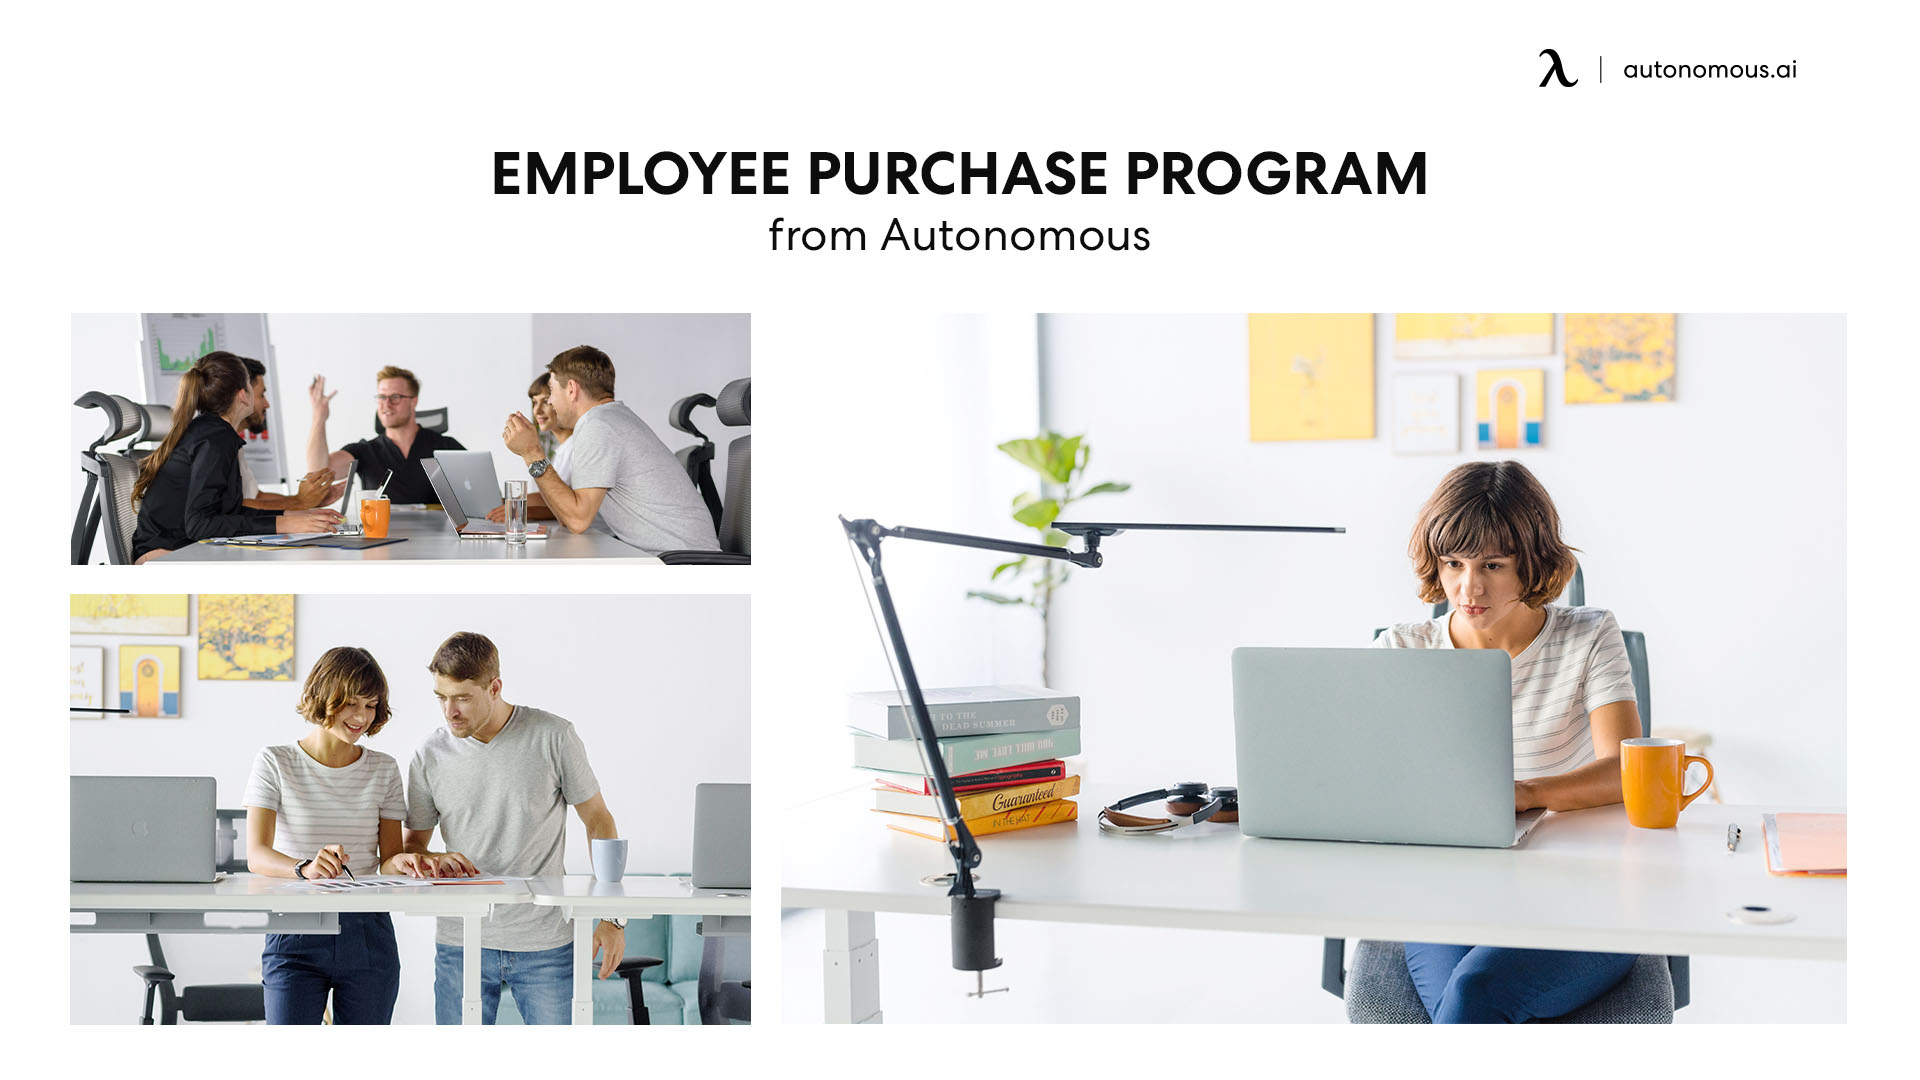 Introducing the Employee Purchase Program from Autonomous